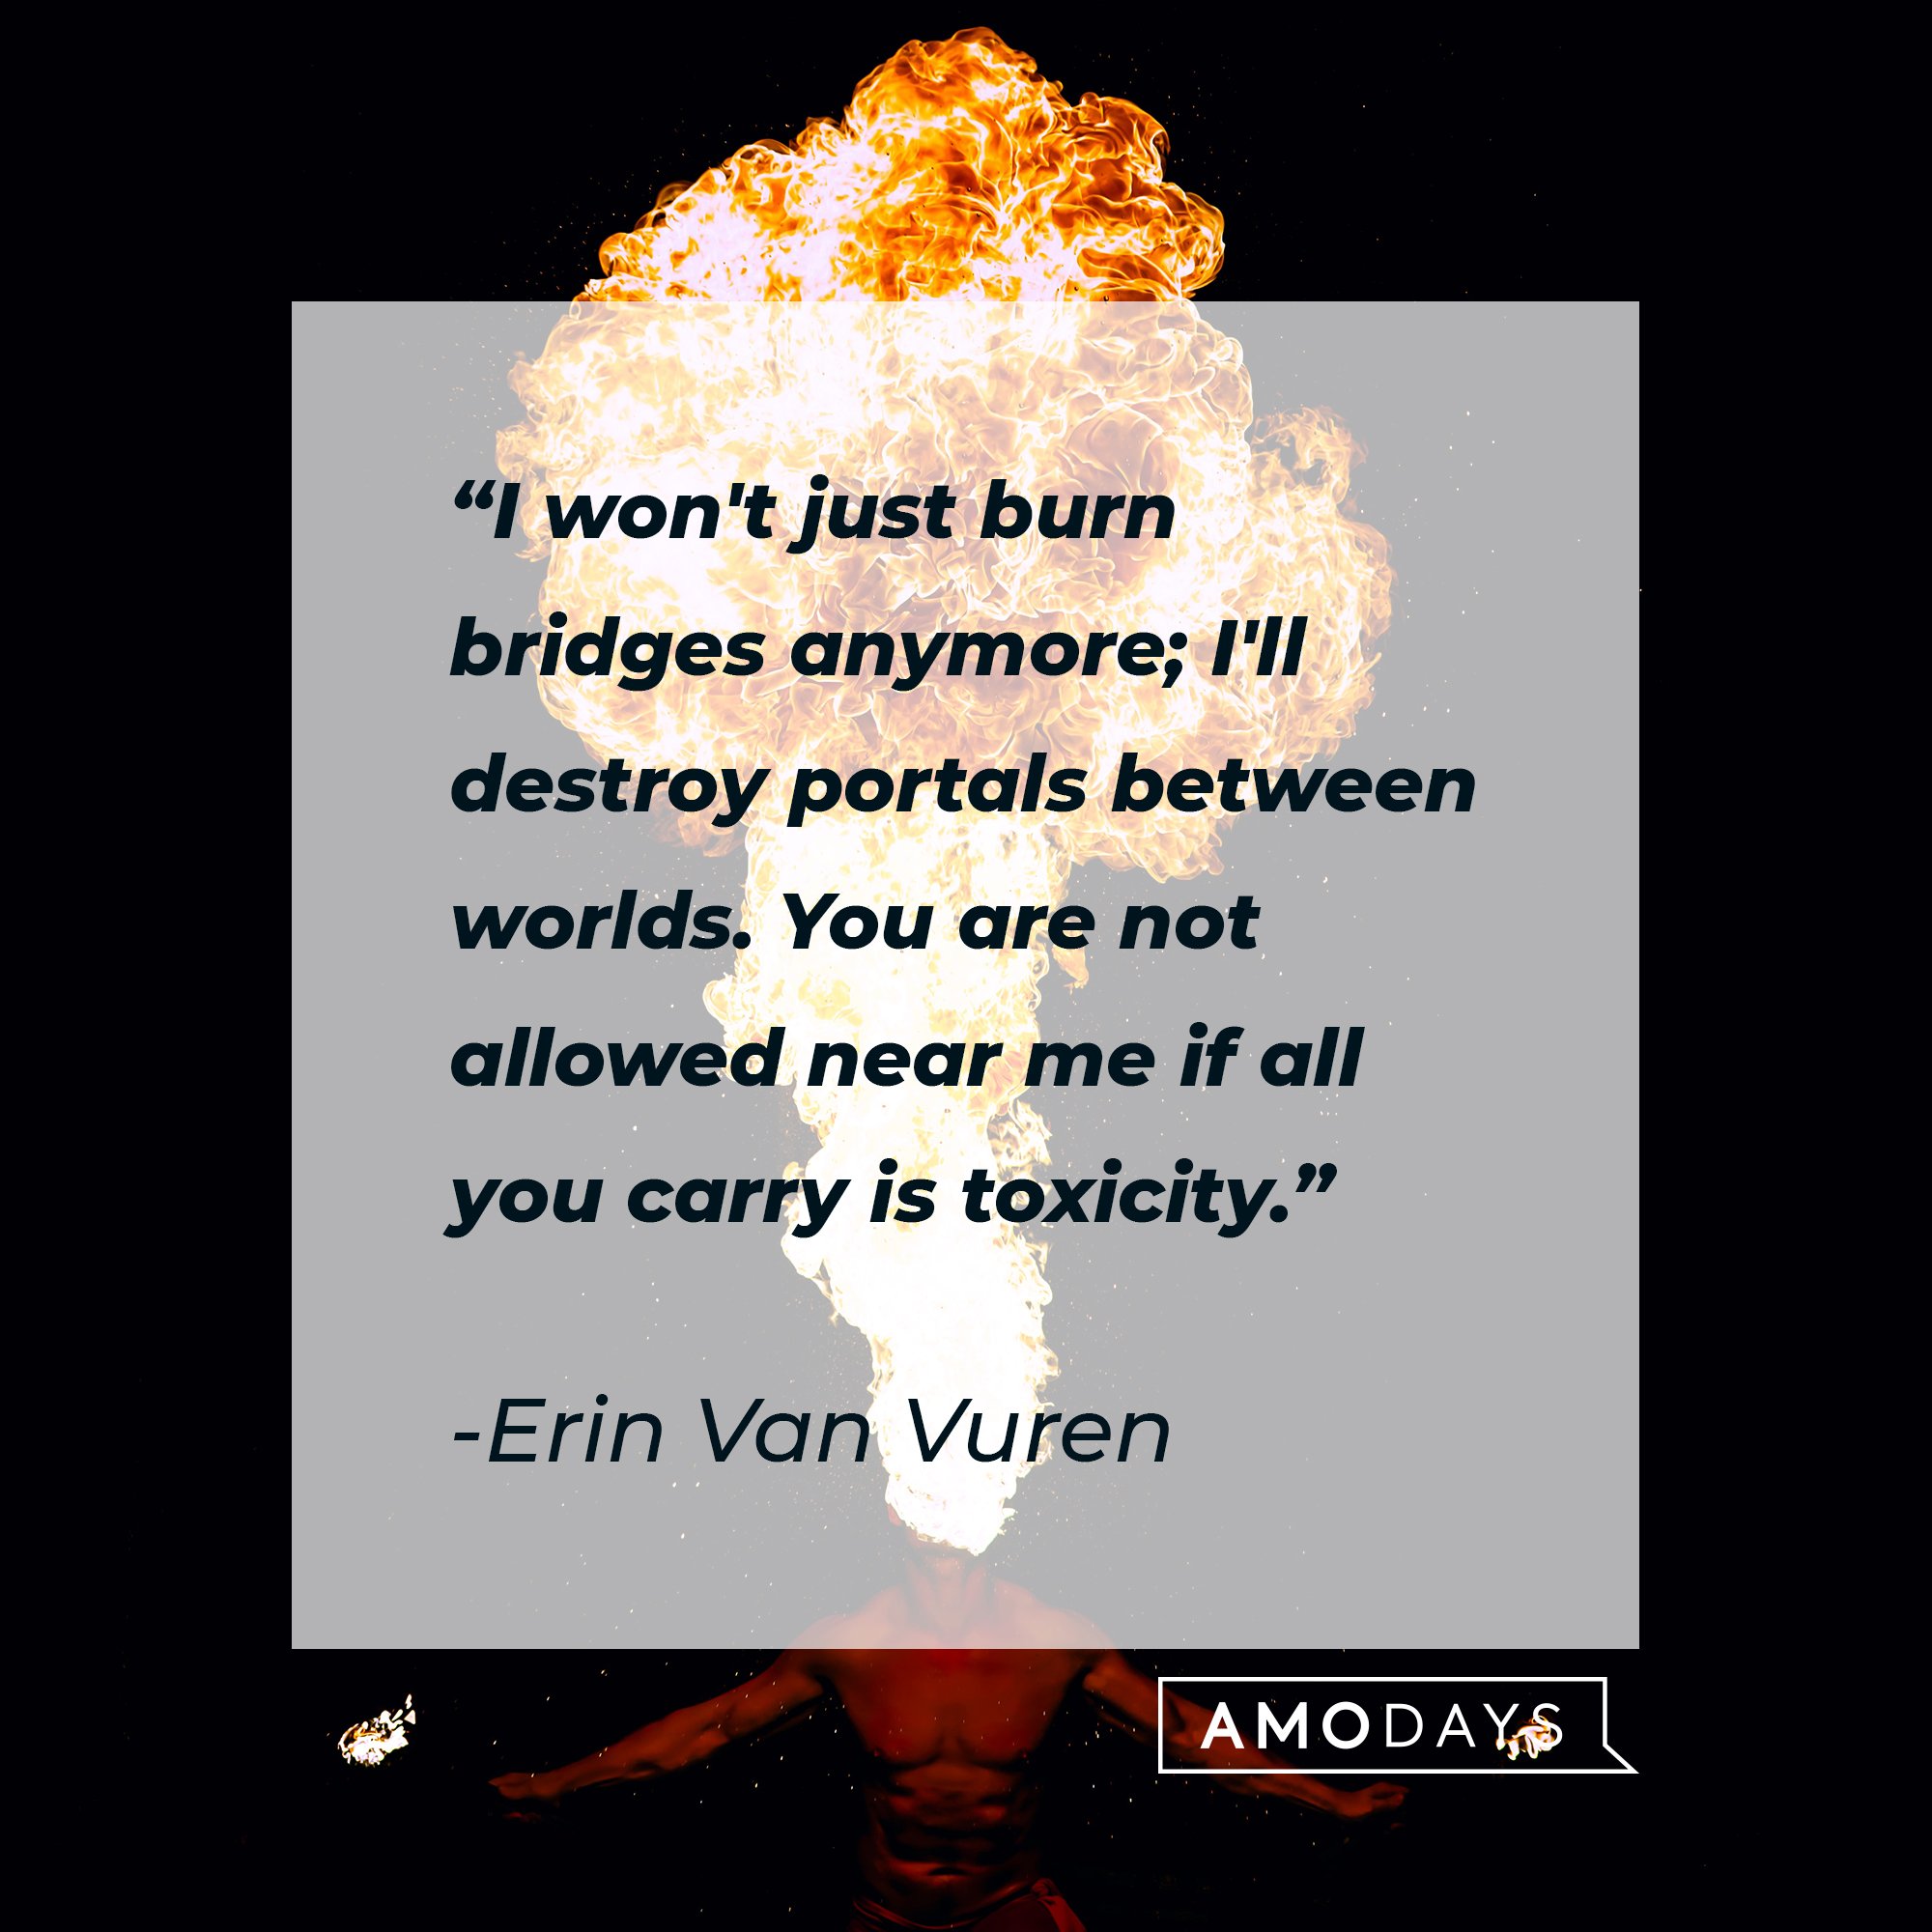 Erin Van Vuren’s quote: "I won't just burn bridges anymore; I'll destroy portals between worlds. You are not allowed near  me if all you carry is toxicity." | Image: AmoDays